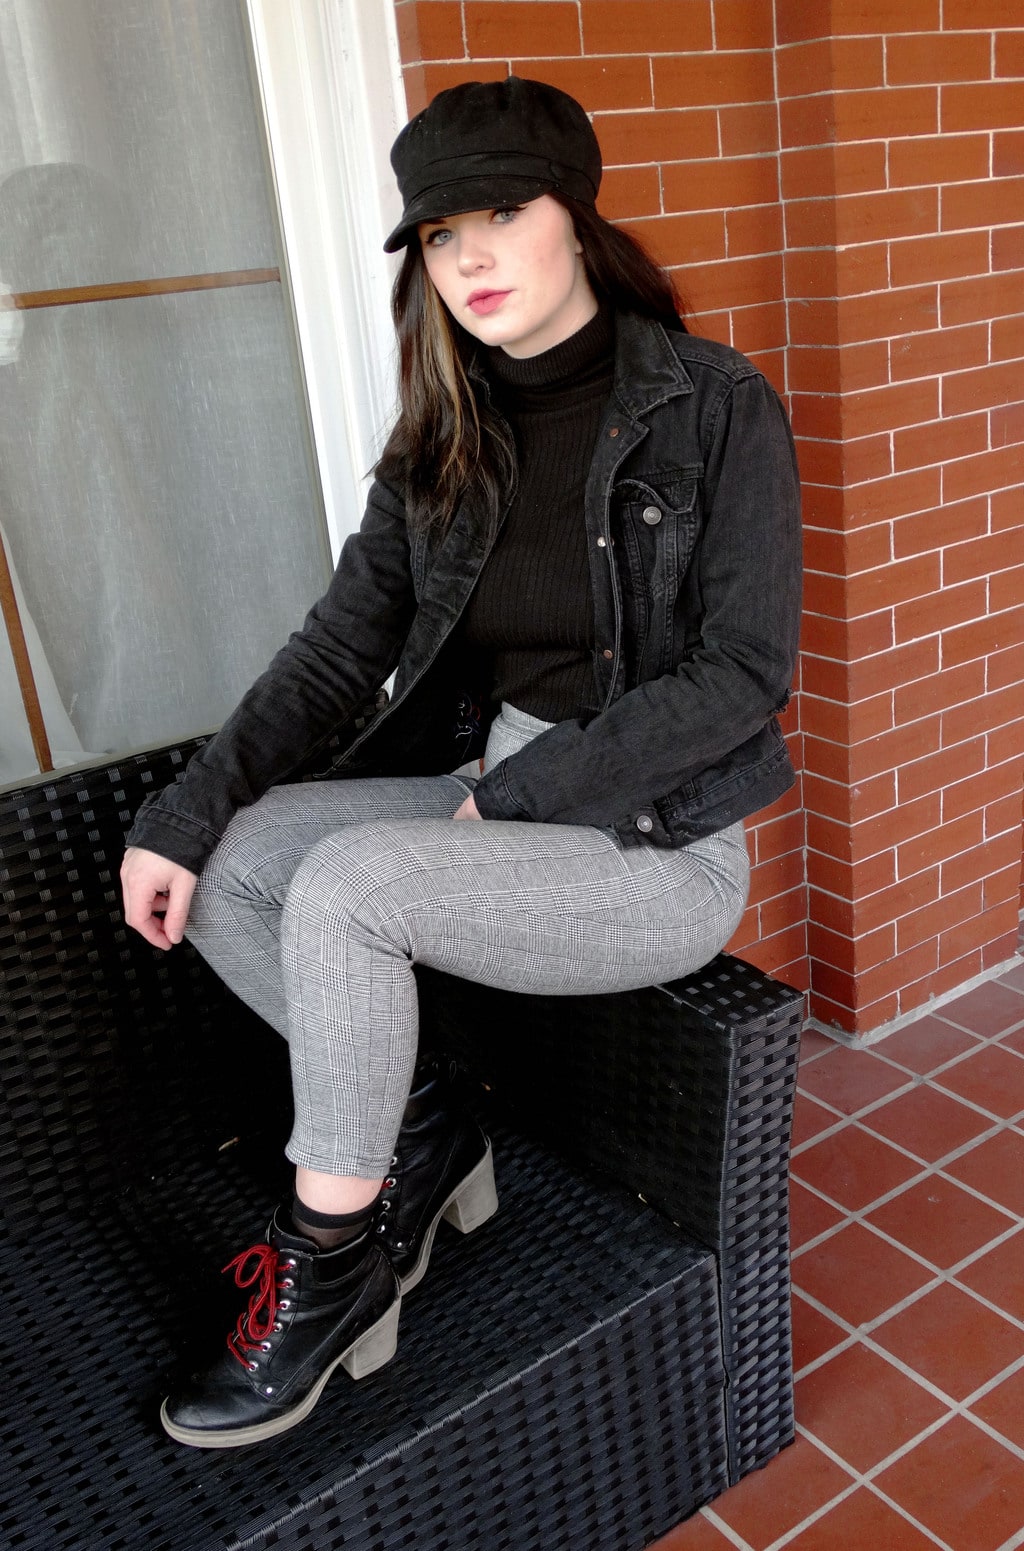 West Virginia University student wears a black turtleneck sweater with white and grey checkered pants, lace up chunky-heeled booties, a distressed dark grey denim jacket, and a black cabby hat.